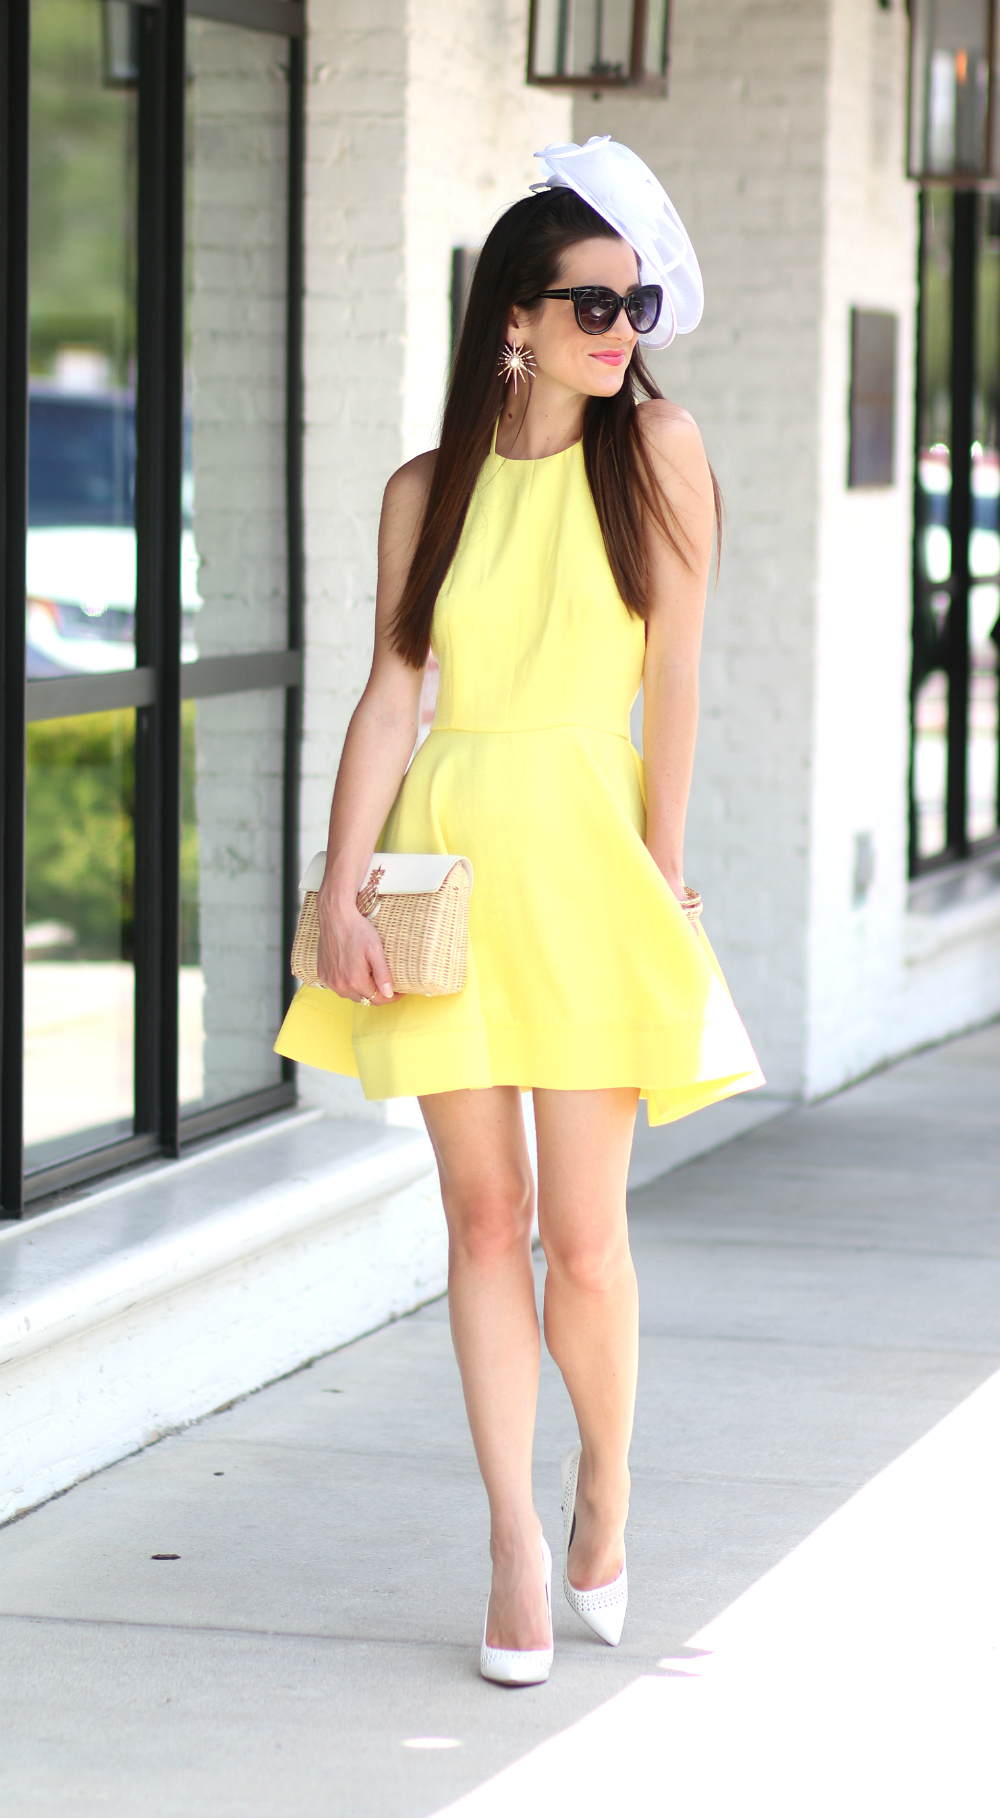 Yellow Derby Dress and White Fascinator Hat - Diary of a Debutante